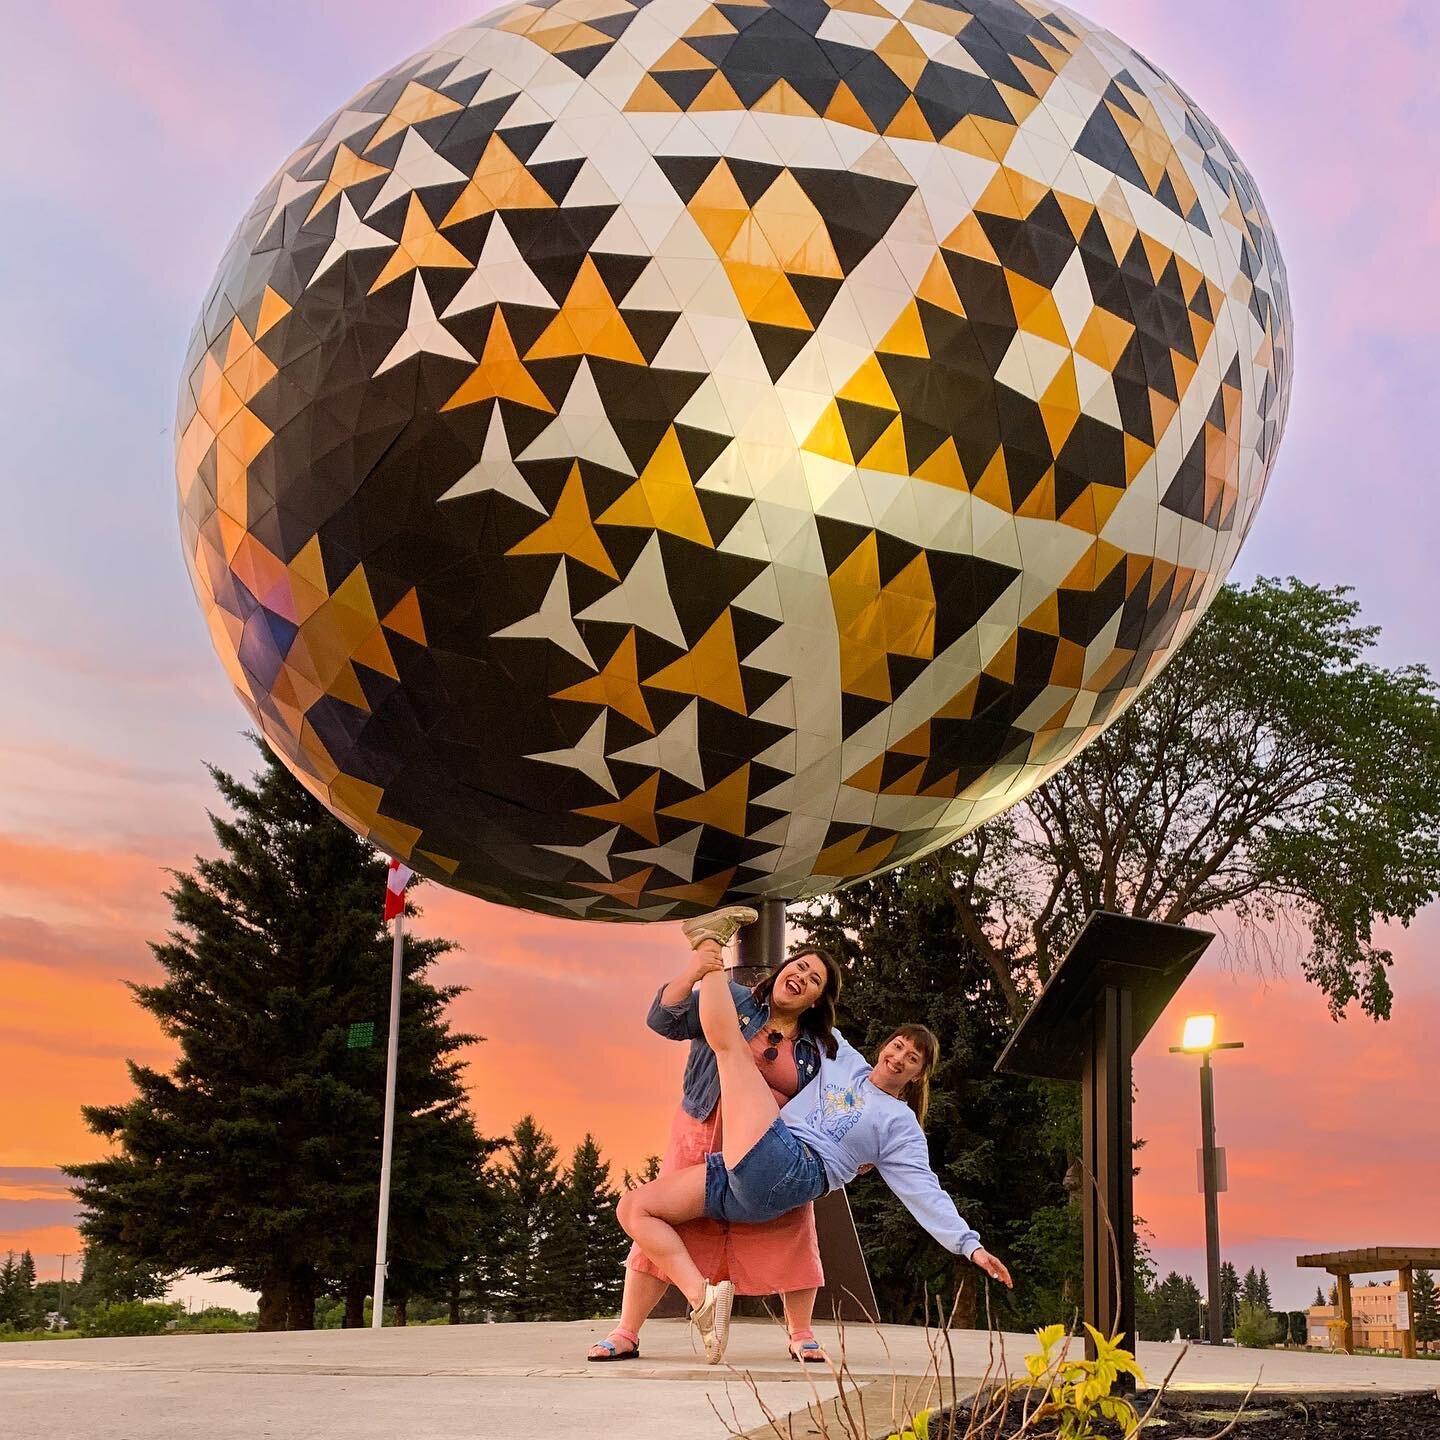 We are two Ukrainians who came from Winnipeg. 
We drove for 13 hours until we reached the giant egg.

Ukrainian culture everywhere &mdash; it&rsquo;s our dream come true. 
The festival is where friends meet, and we loved seeing you. 

Singing, dancin